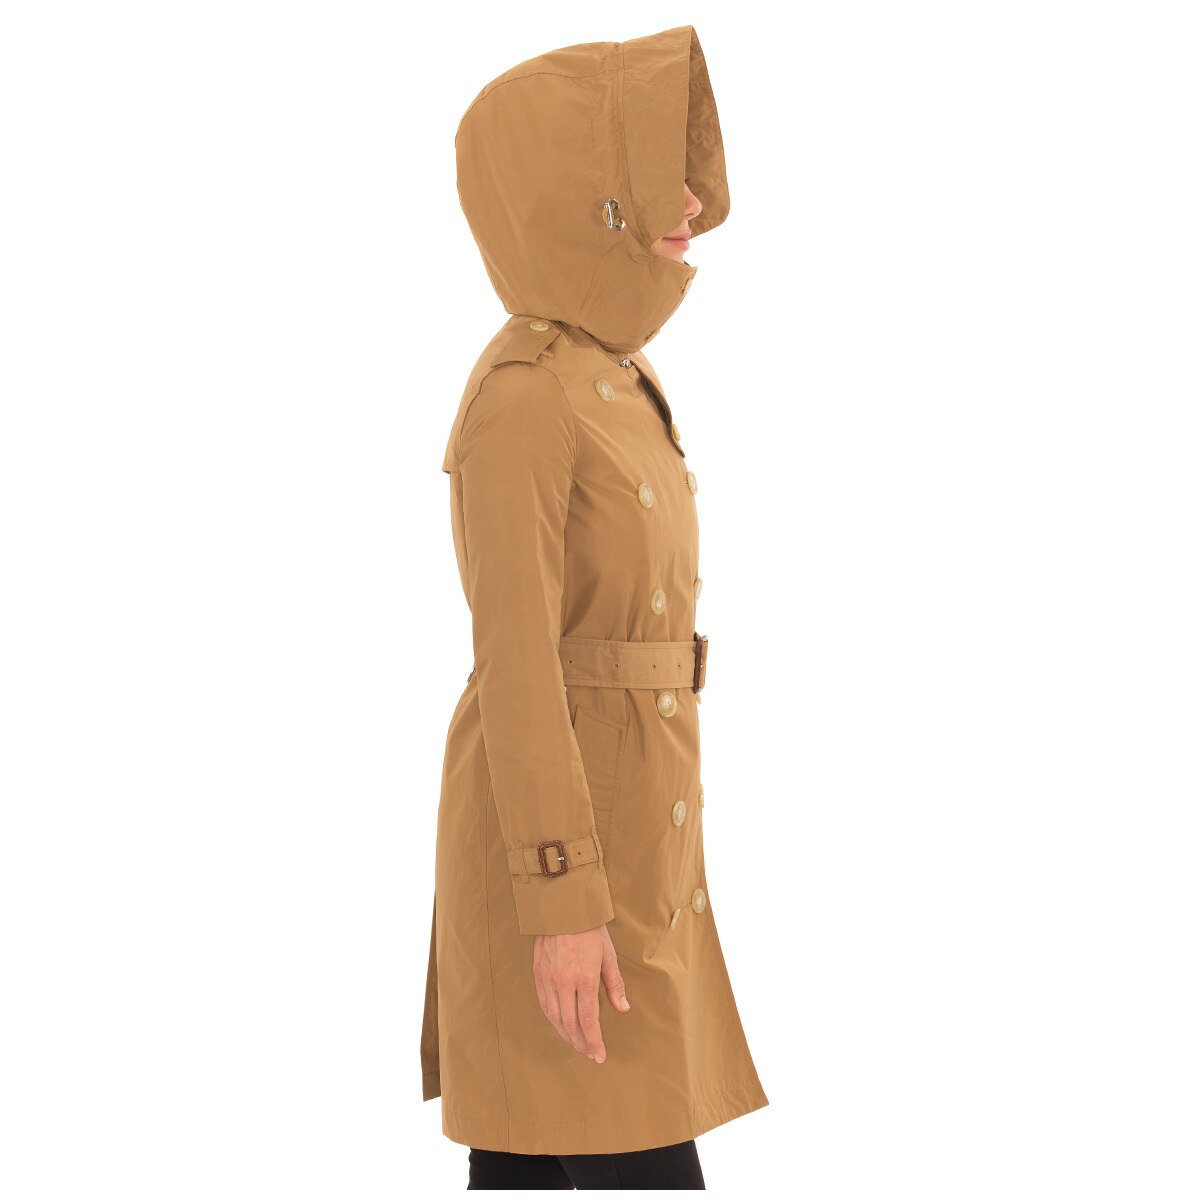 Burberry Trench Coat - Camel